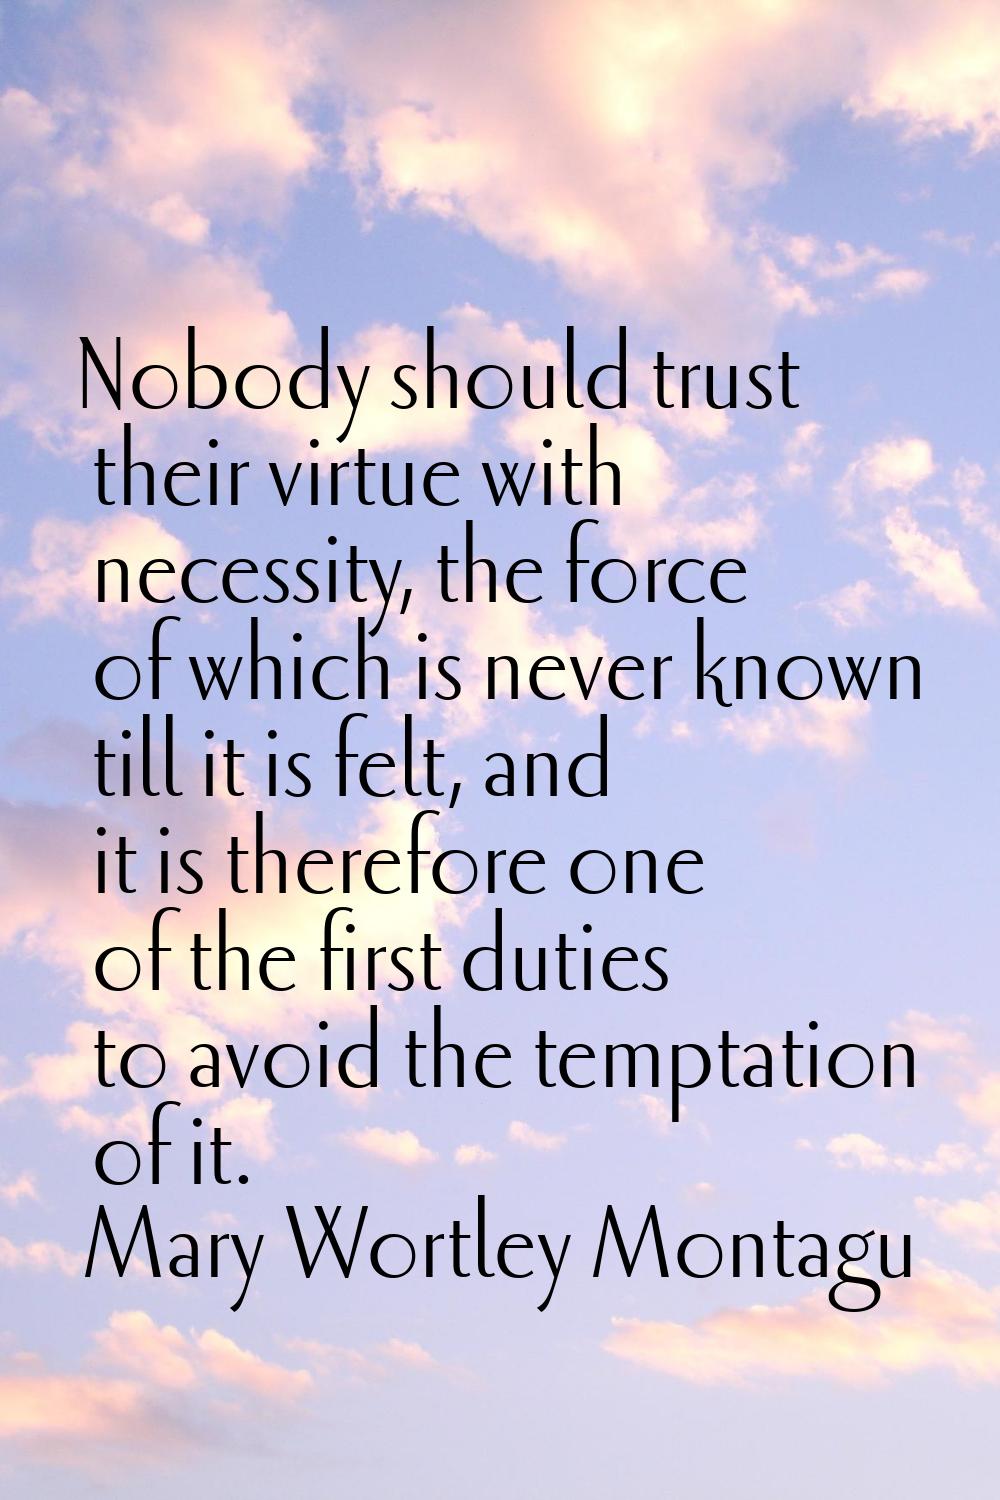 Nobody should trust their virtue with necessity, the force of which is never known till it is felt,